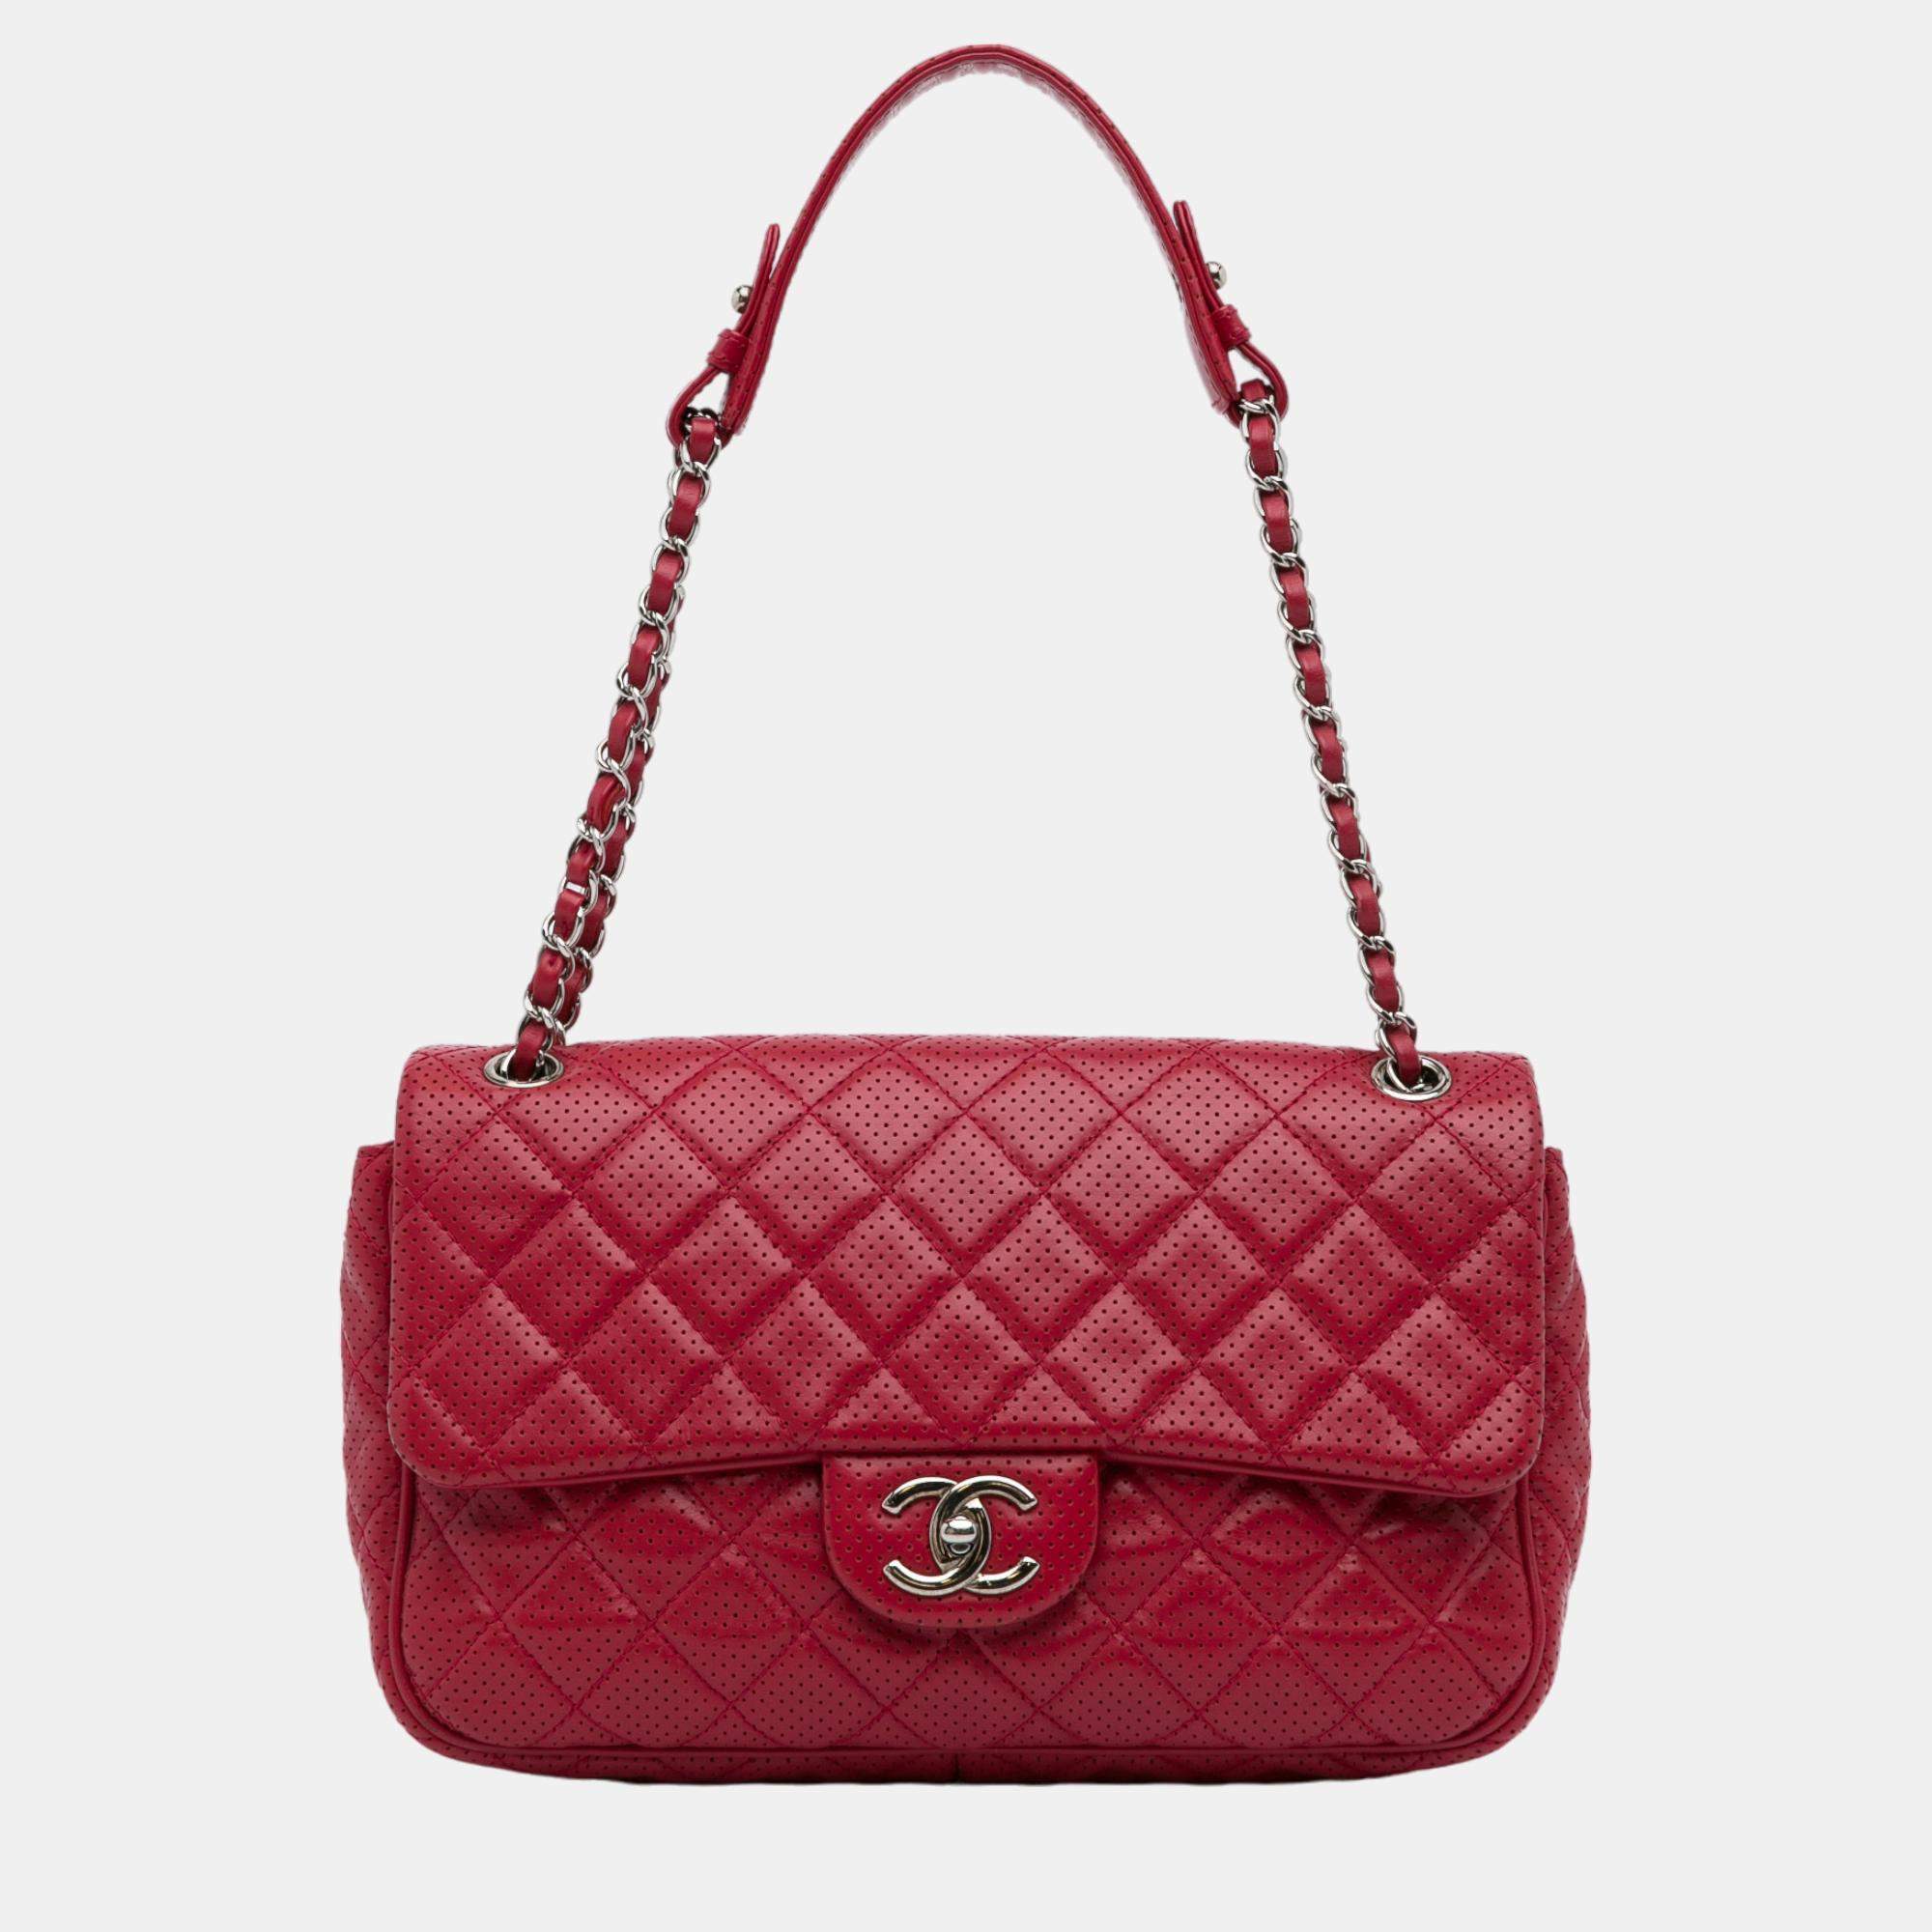 Chanel Red Quilted Iridescent Leather Chic Quilt Flap Bag Chanel | The  Luxury Closet